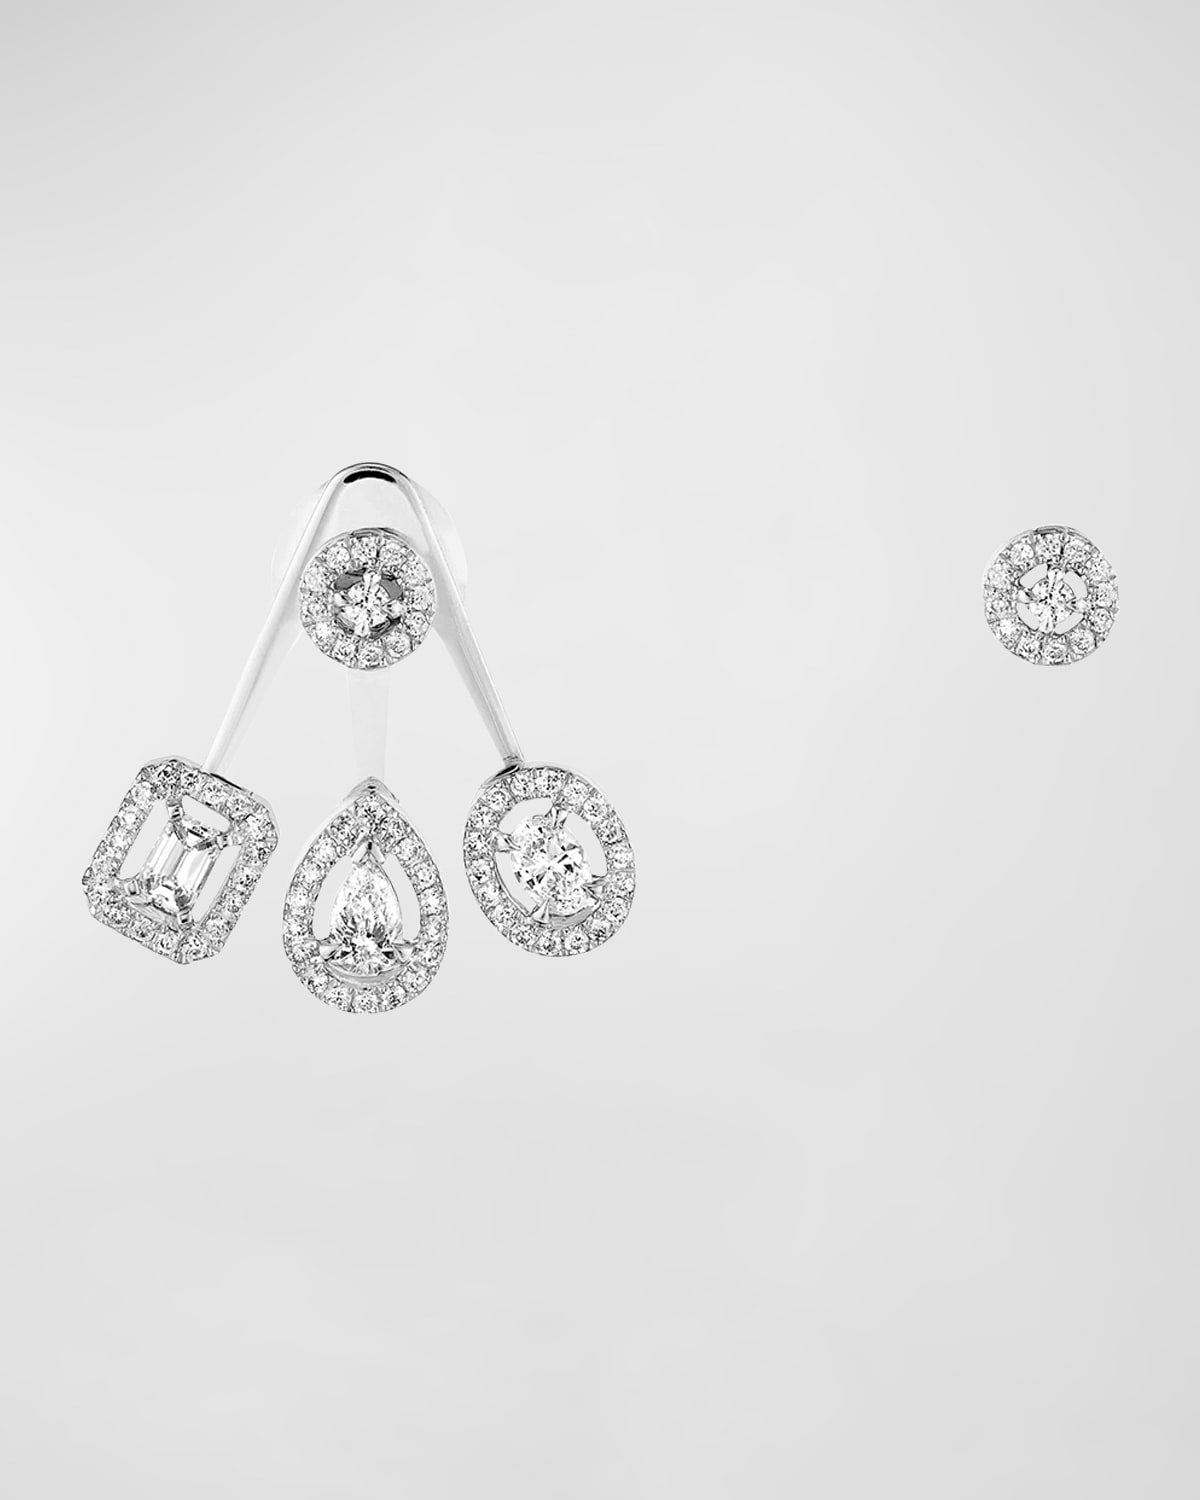 Messika My Twin Trio 18k White Gold Diamond Earring Jackets In 10 White Gold